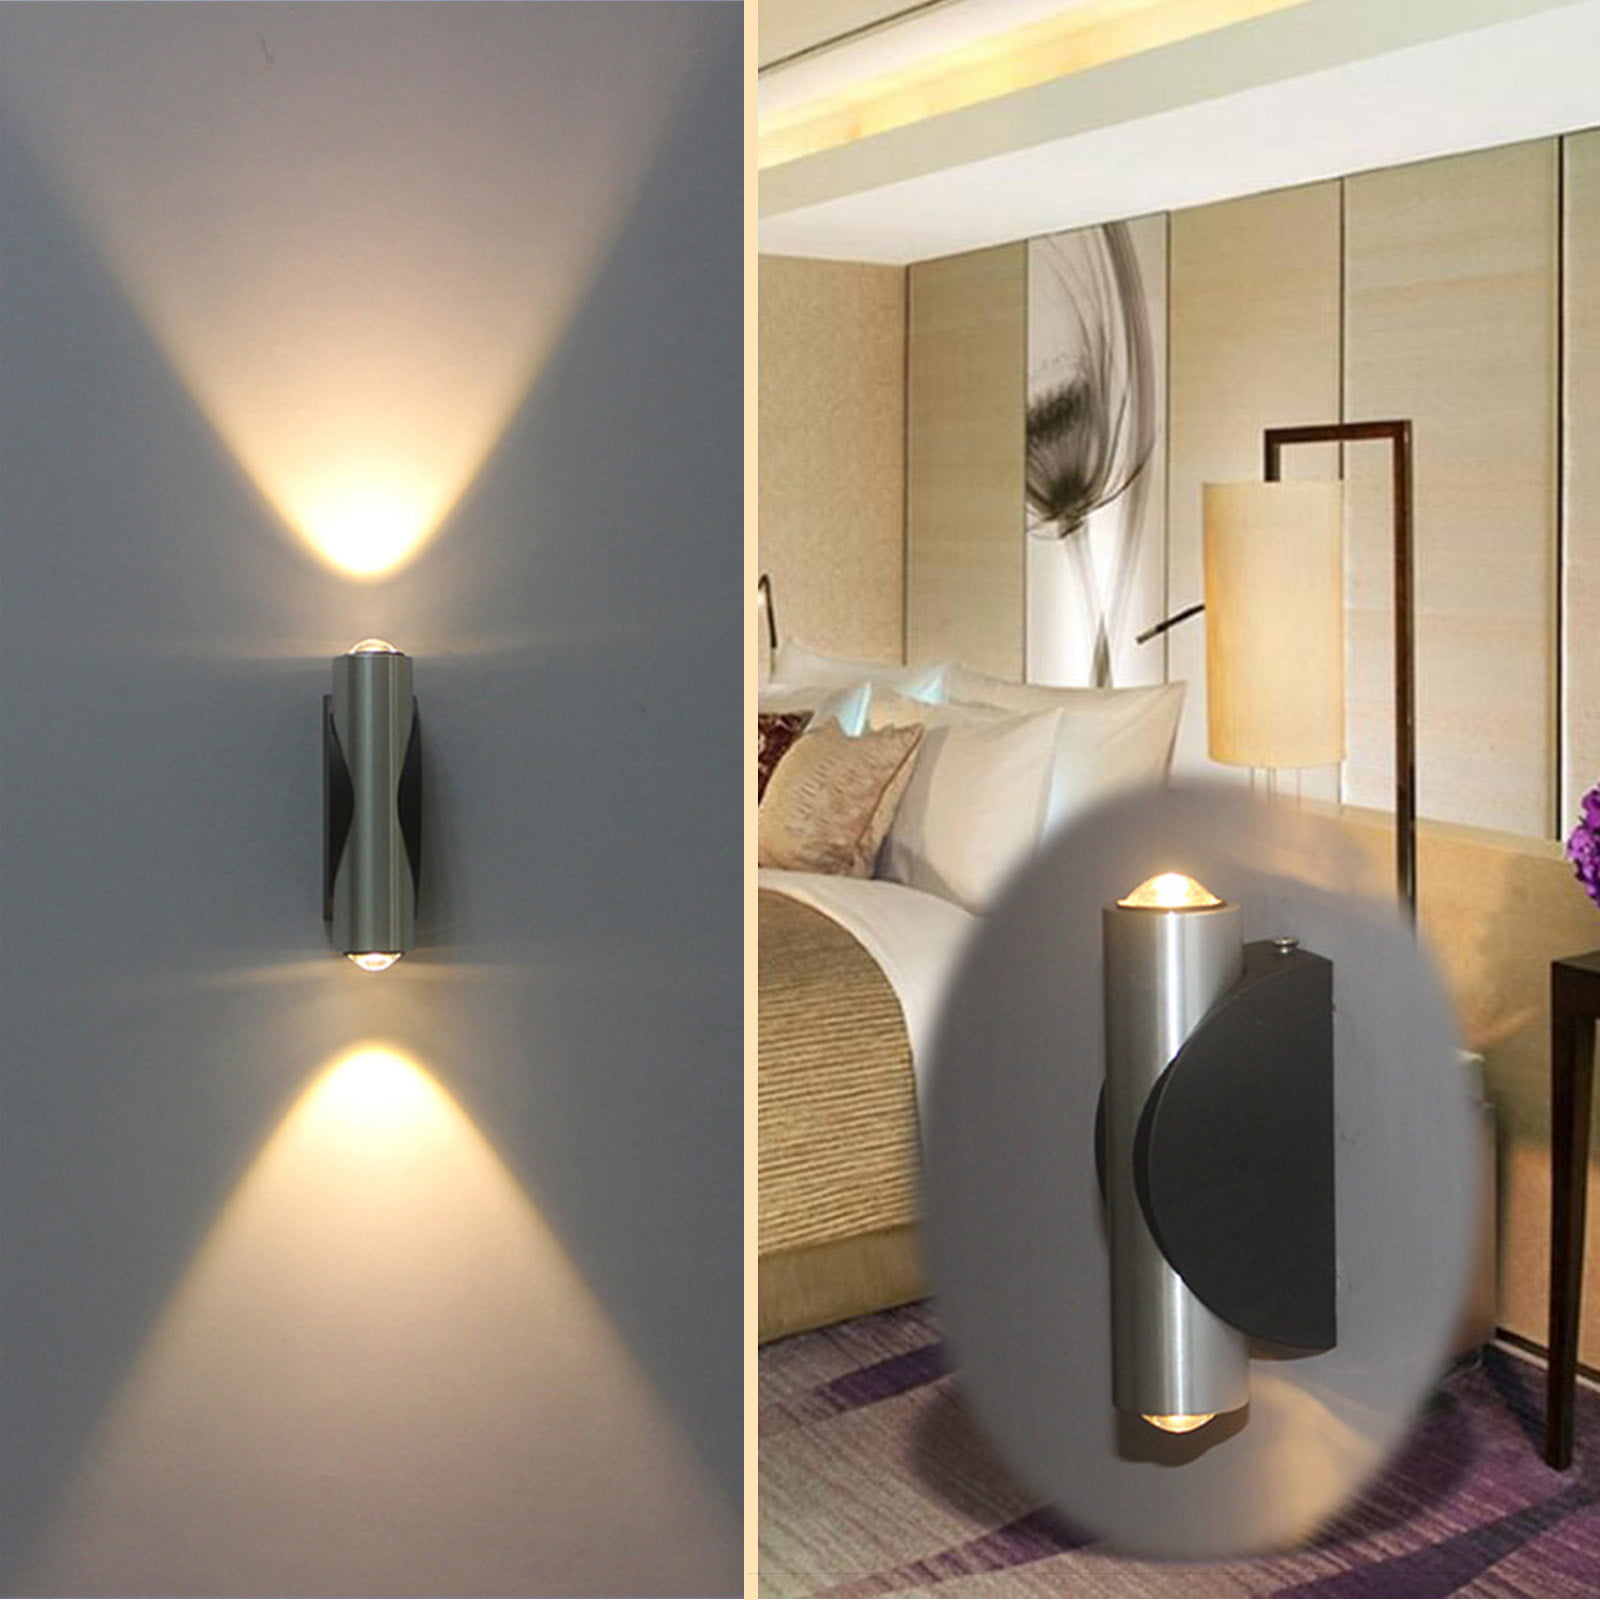 Led Lights For Bedroom Double-Headed Led Wall Lamp Home Sconce Porch Wall Decor Ceiling Light Warm White - Walmart.com